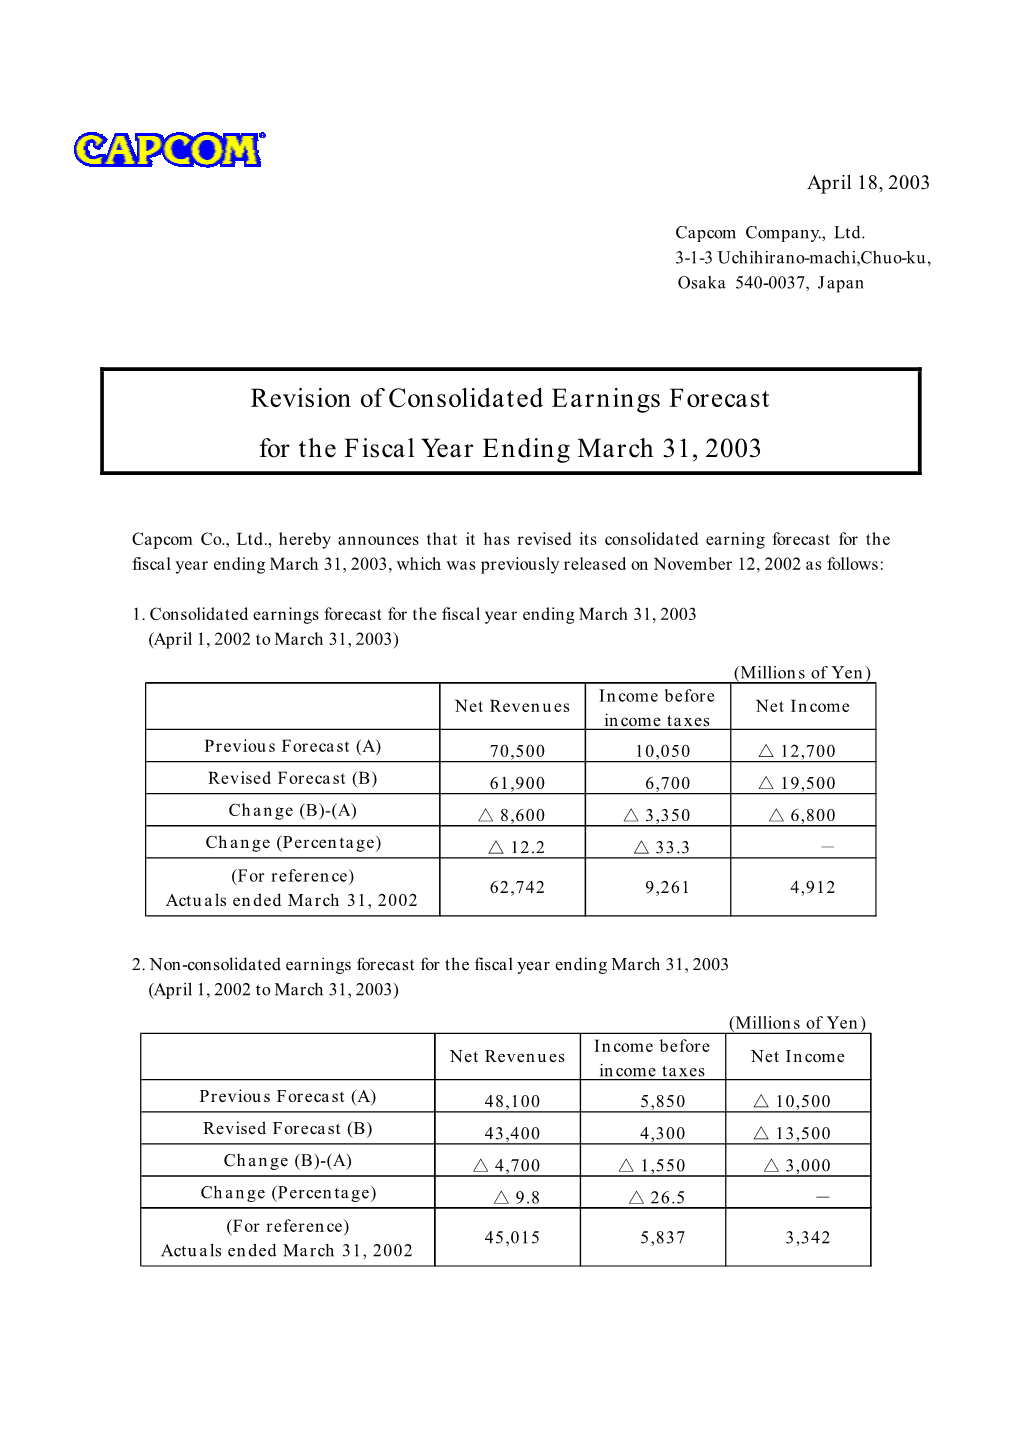 Revision of Consolidated Earnings Forecast for the Fiscal Year Ending March 31, 2003